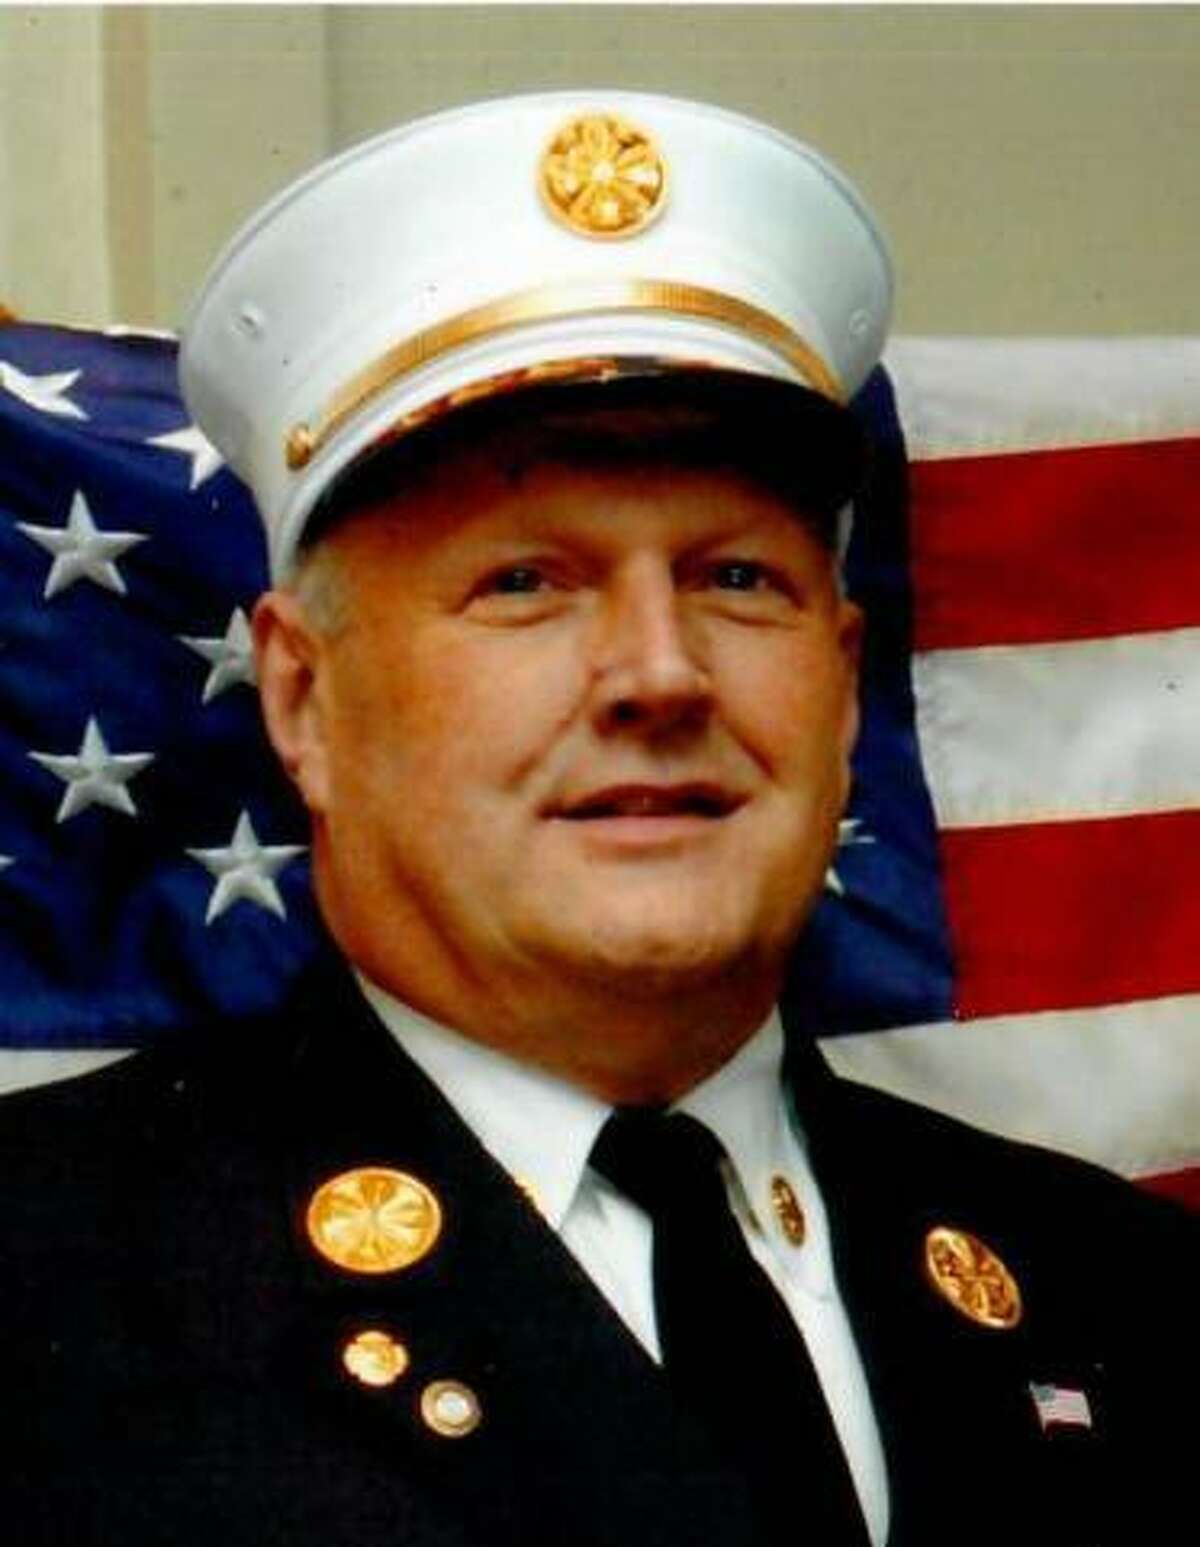 Daniel W. Hoyt, 76, of Trumbull, former chief of the Long Hill Fire Department, died May 10, 2022.